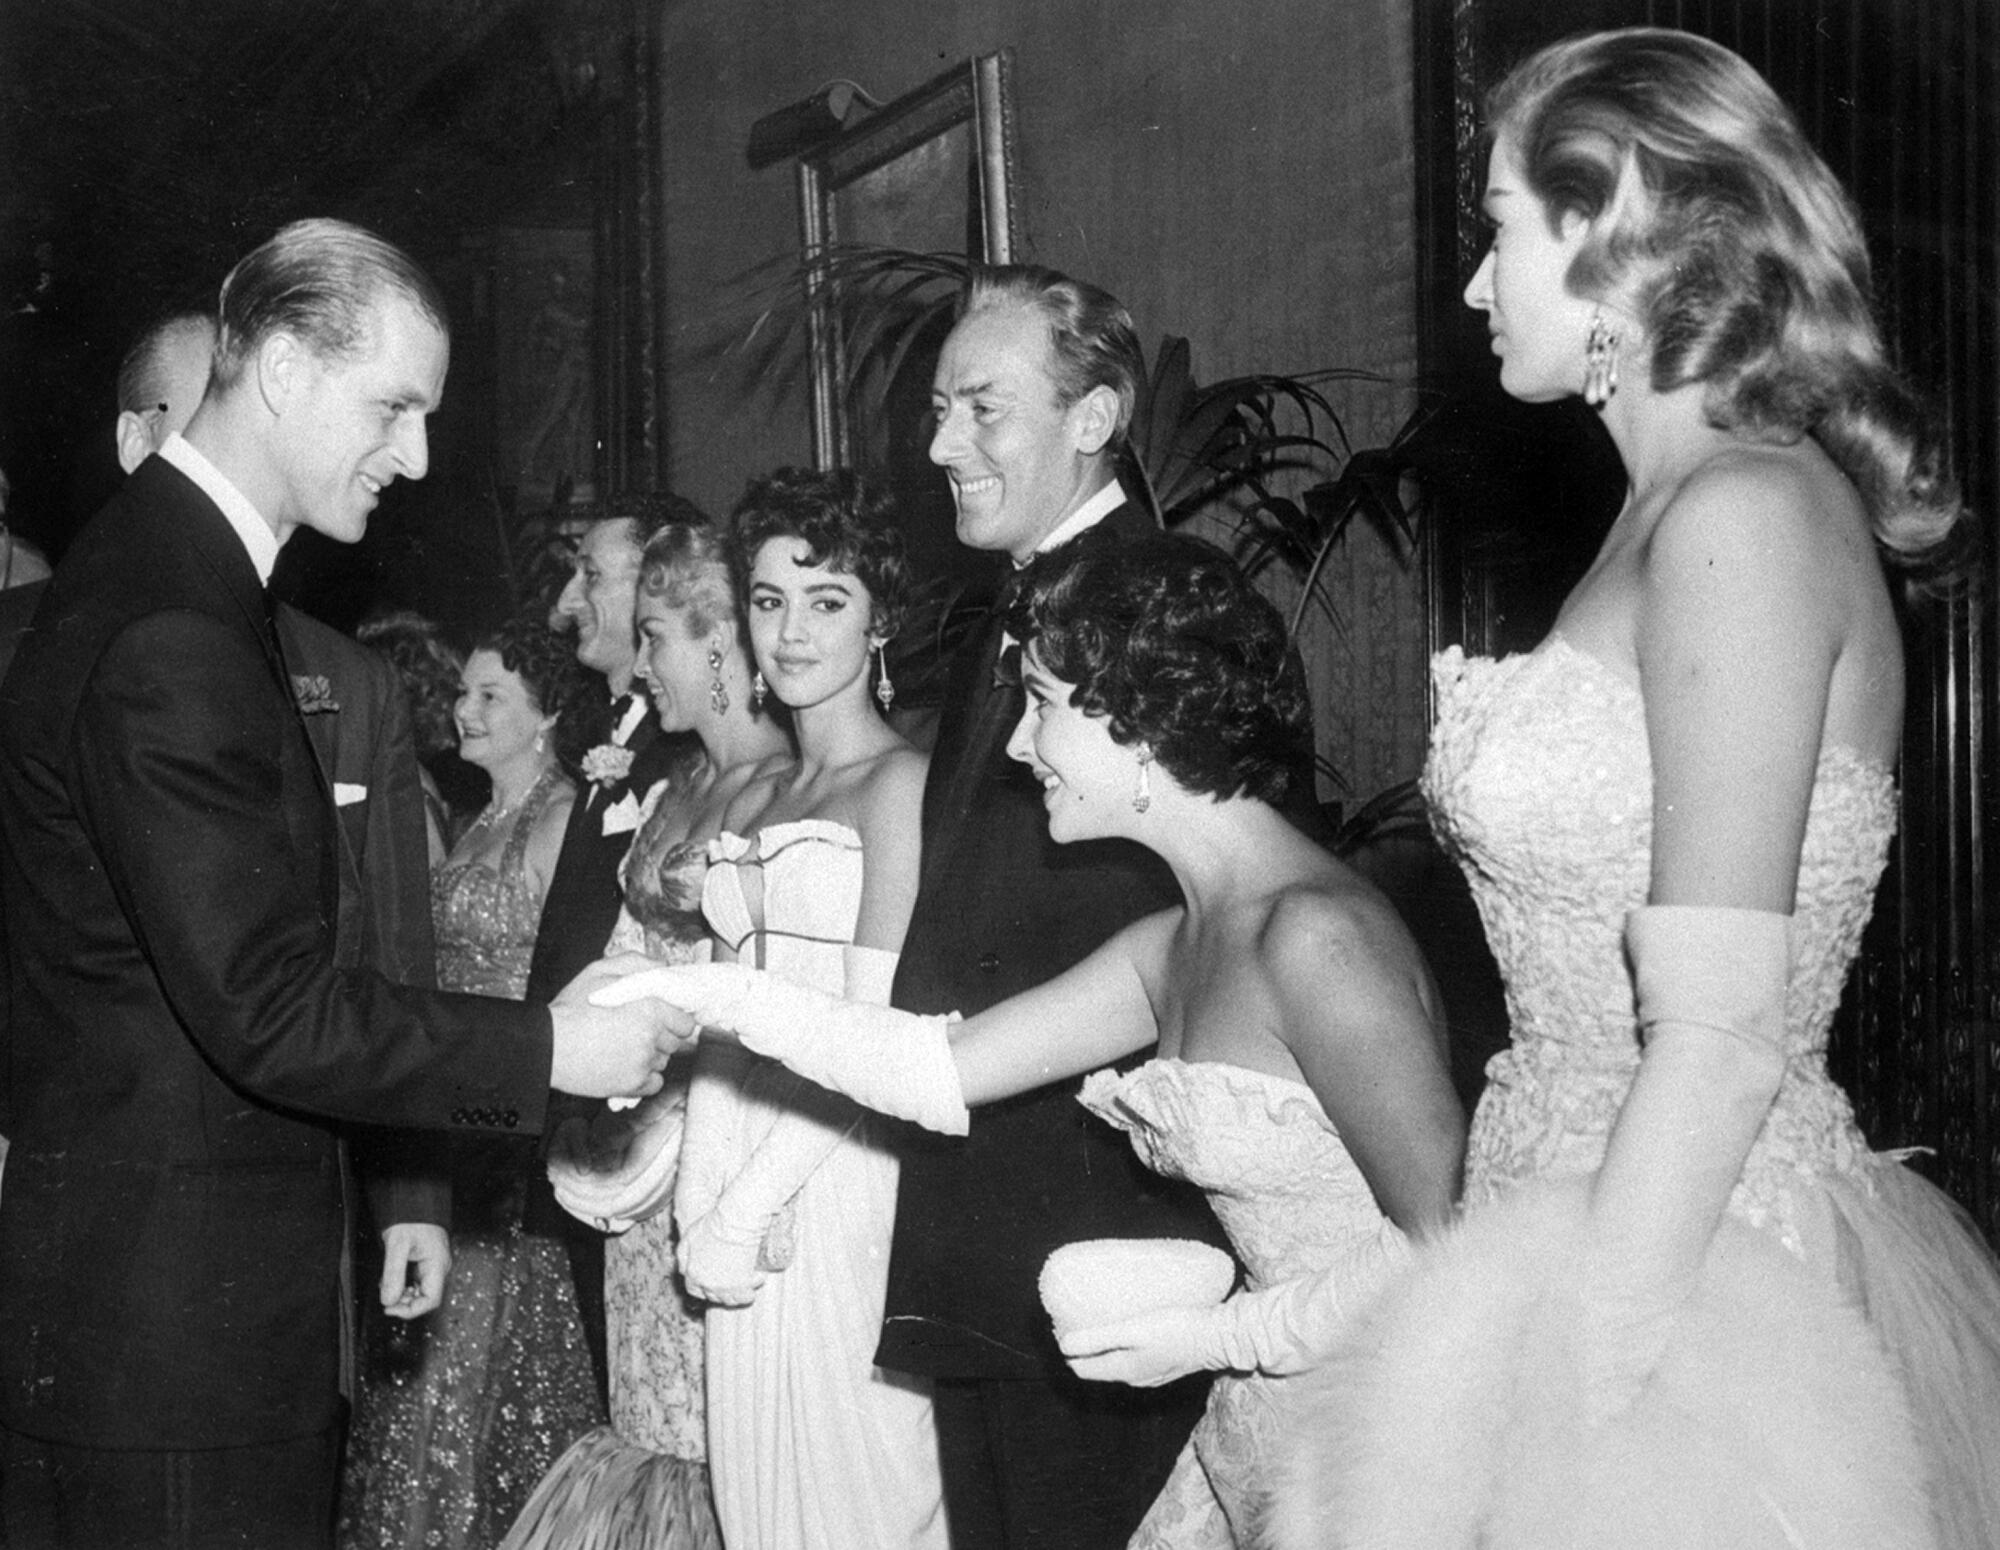 Elizabeth Taylor curtsies in a row of people as Prince Philip greets her.